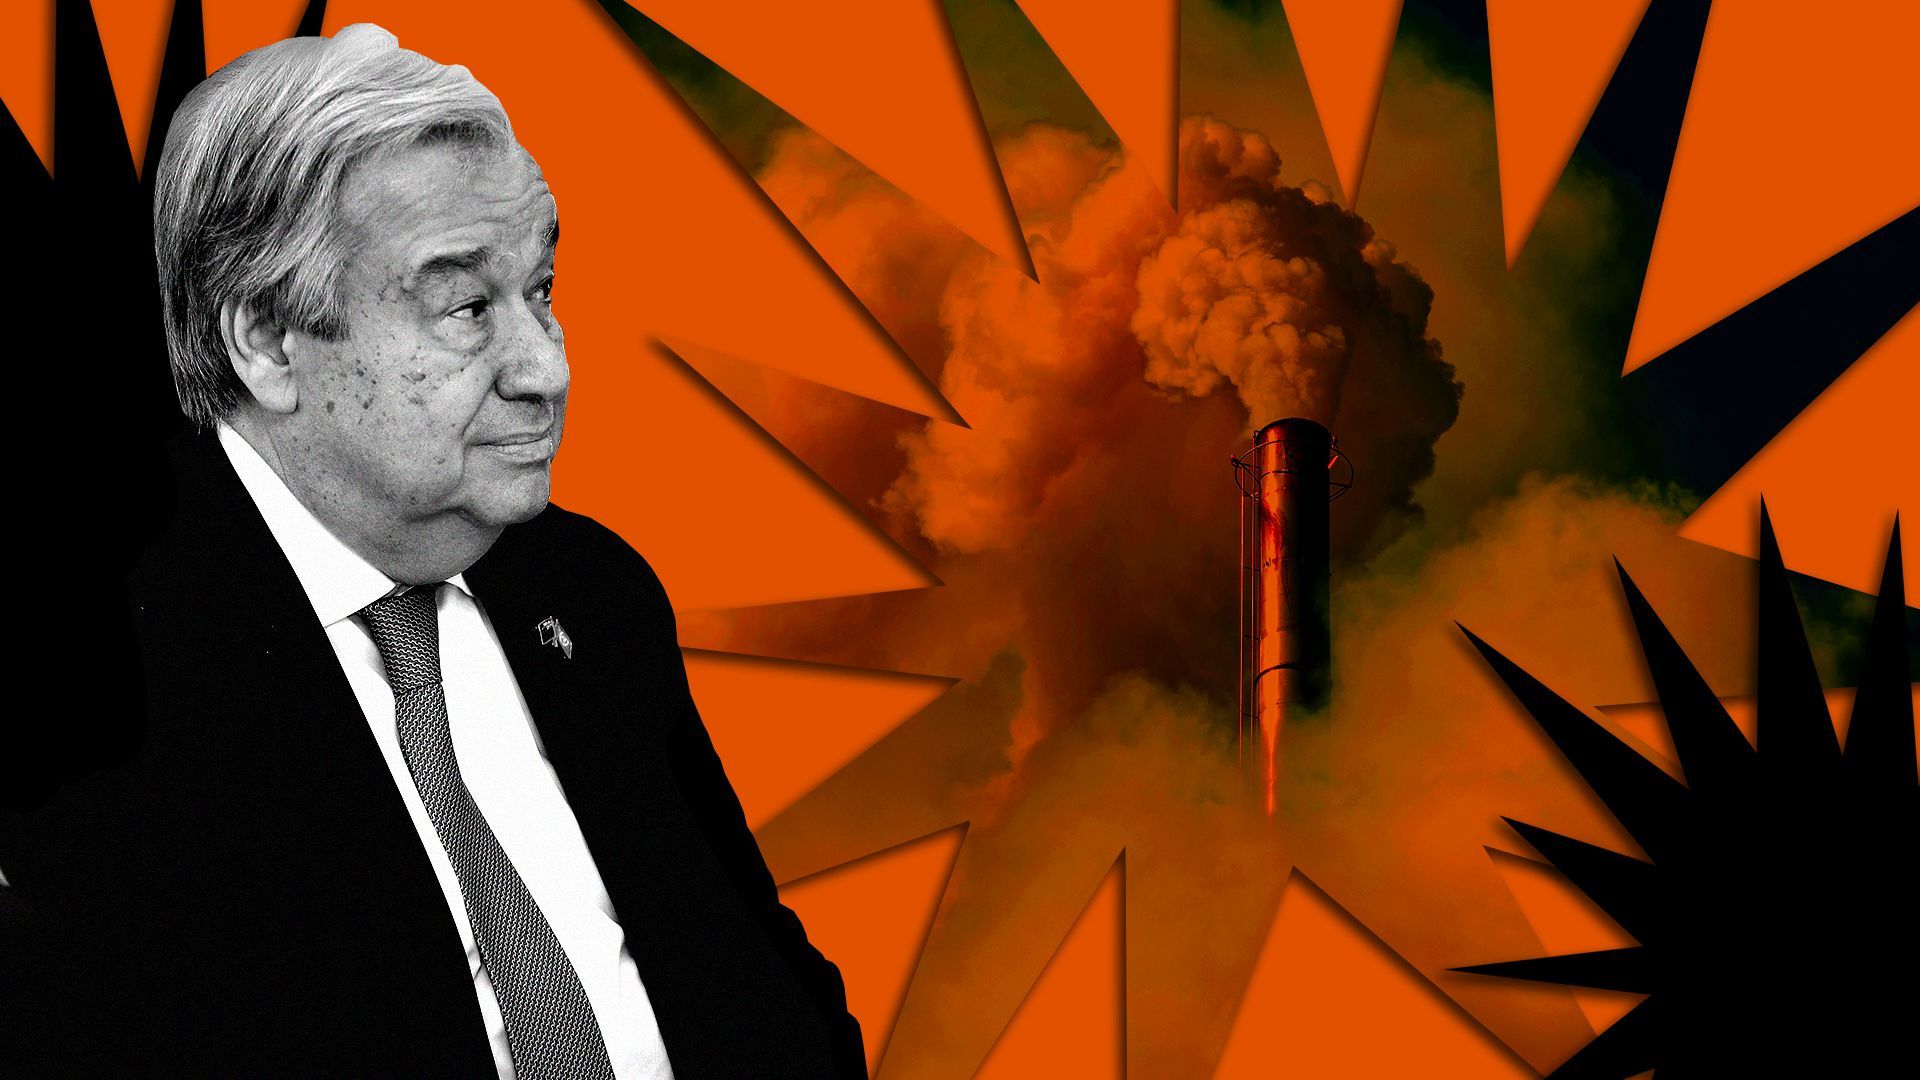 Photo illustration of U.N. Secretary-General Guterres in front of bursting shapes, including one filled with images of greenhouse gas emissions